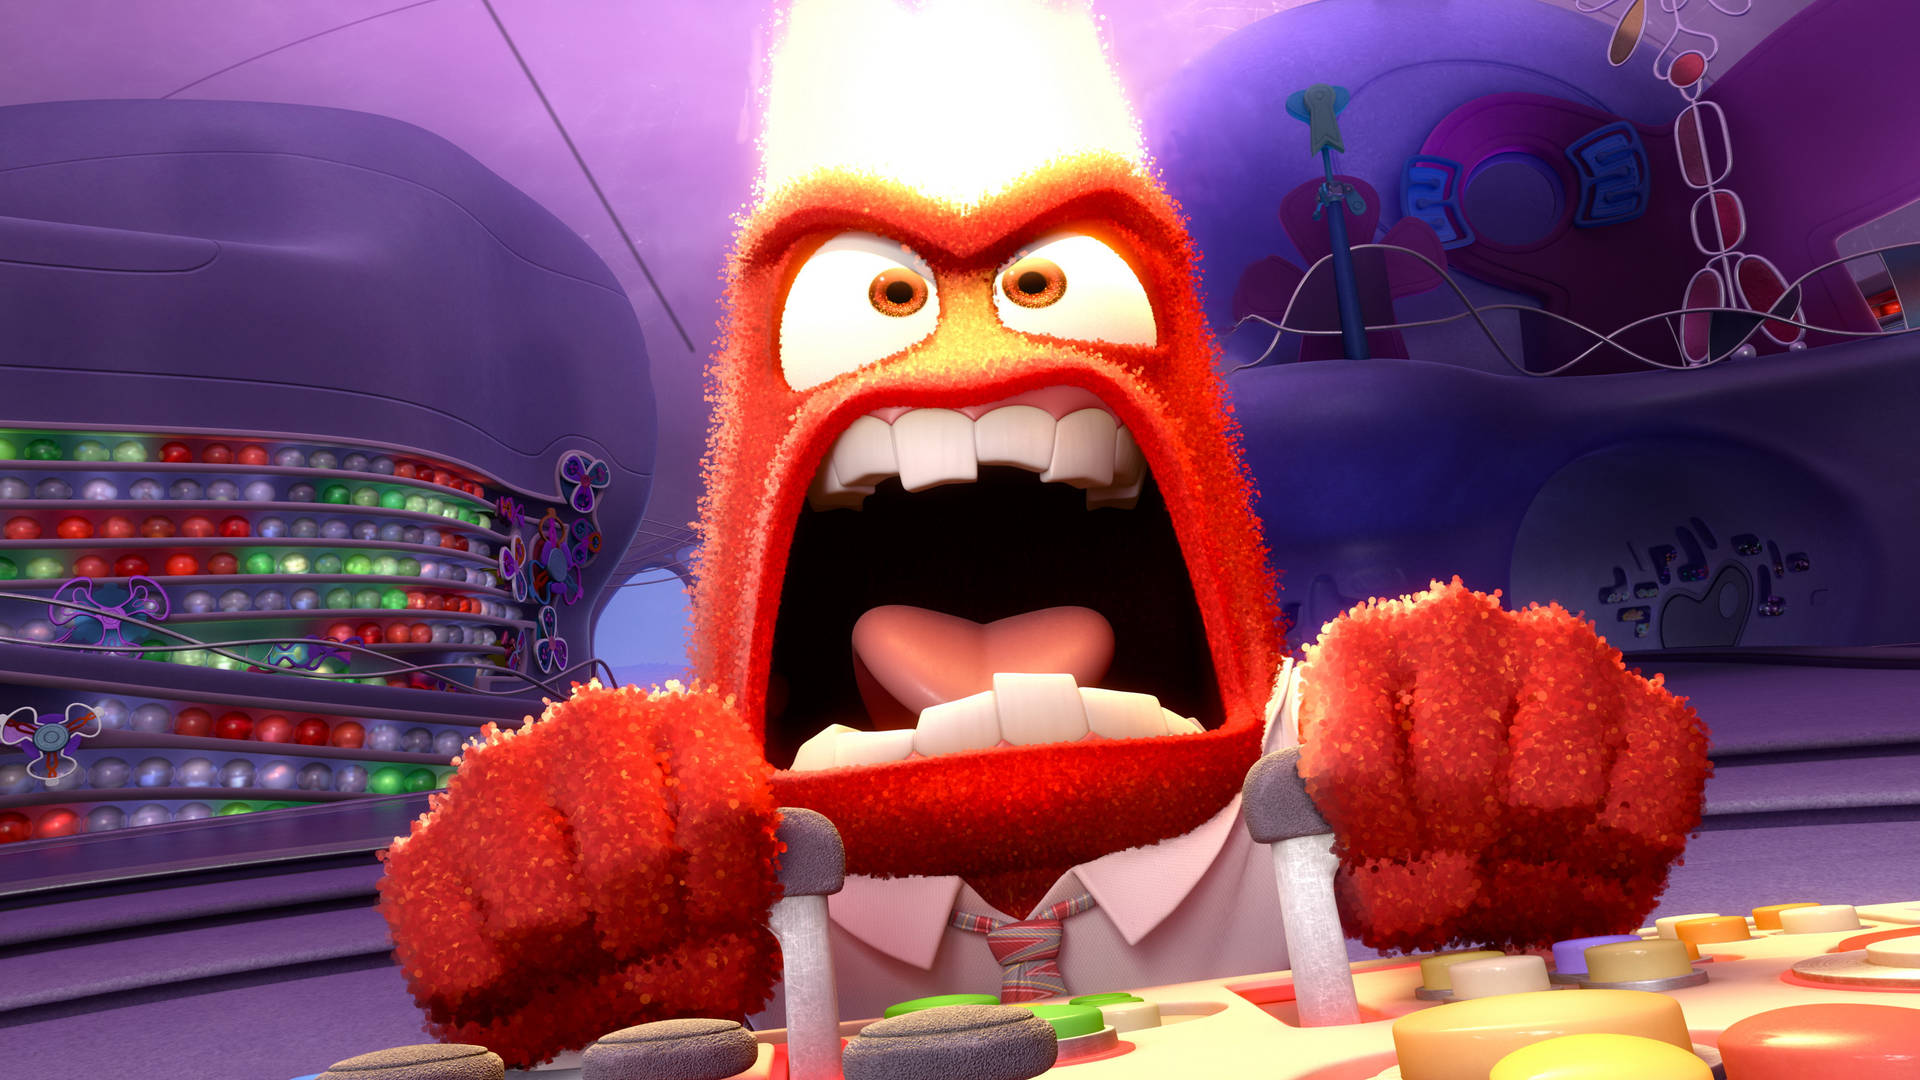 Inside Out's Anger Struggles with Sadness Wallpaper